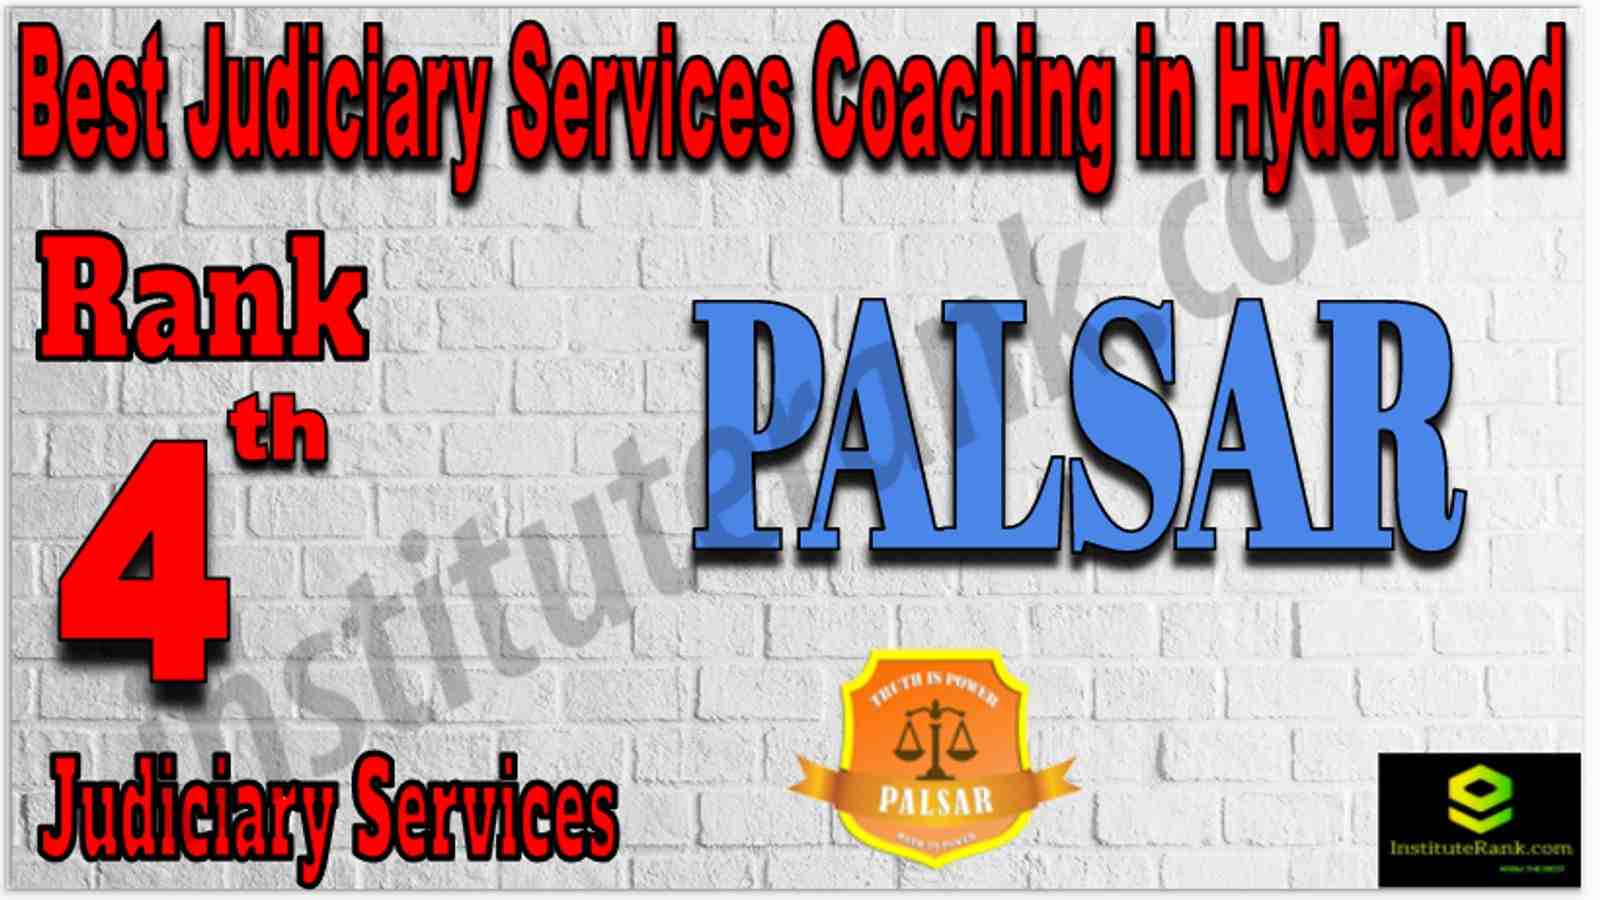 Rank 4 Best Judiciary Services Coaching in Hyderabad